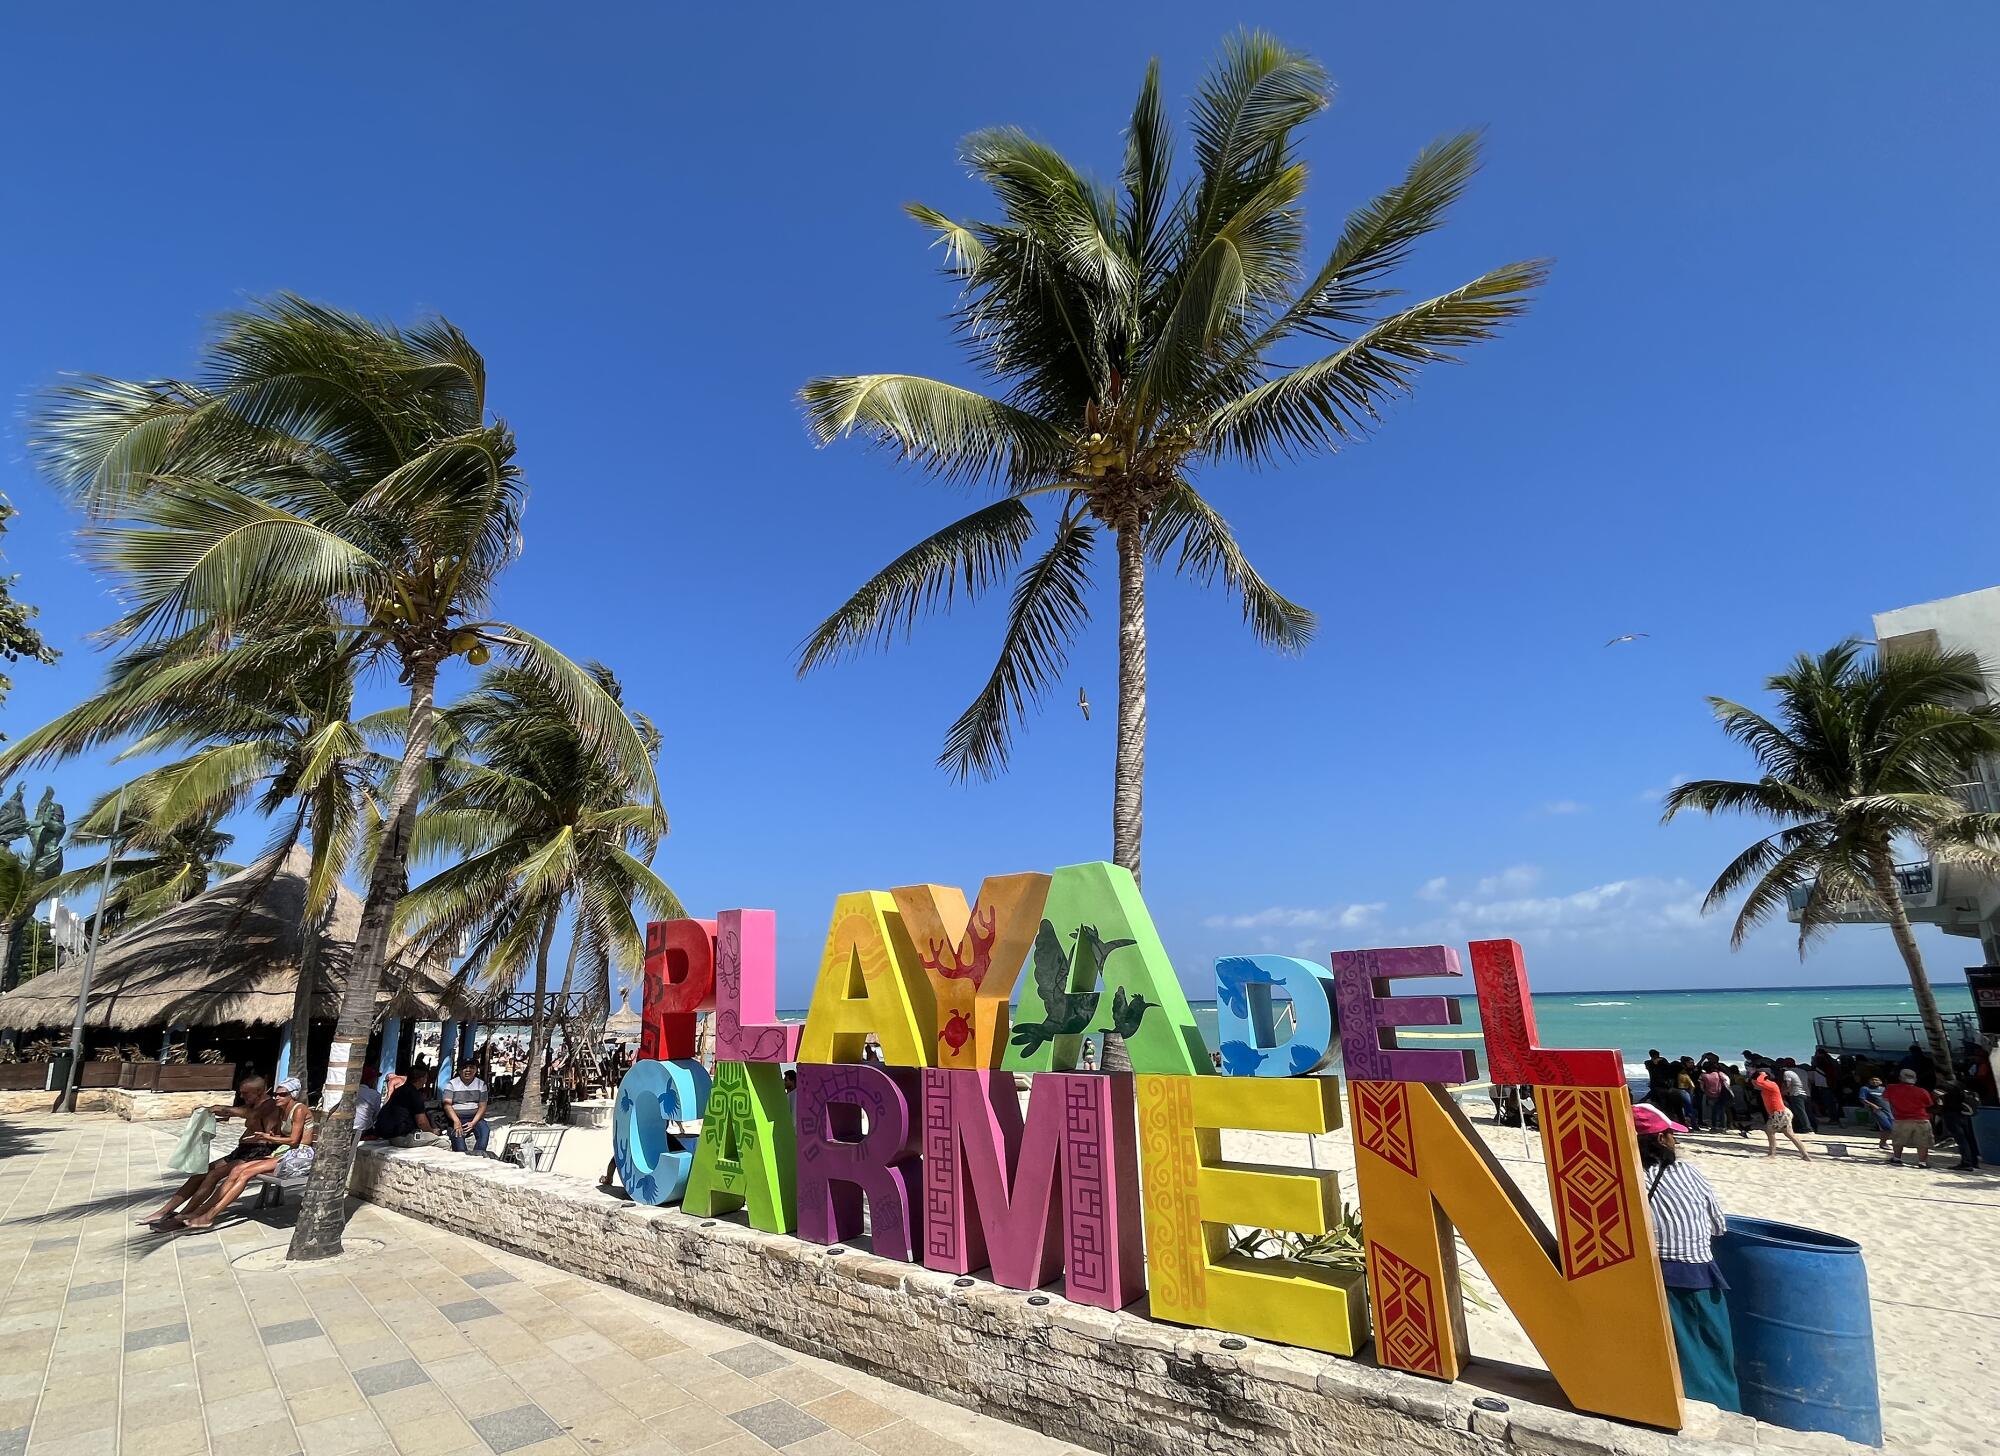 A colorful beachside sign spells out the name Playa del Carmen.